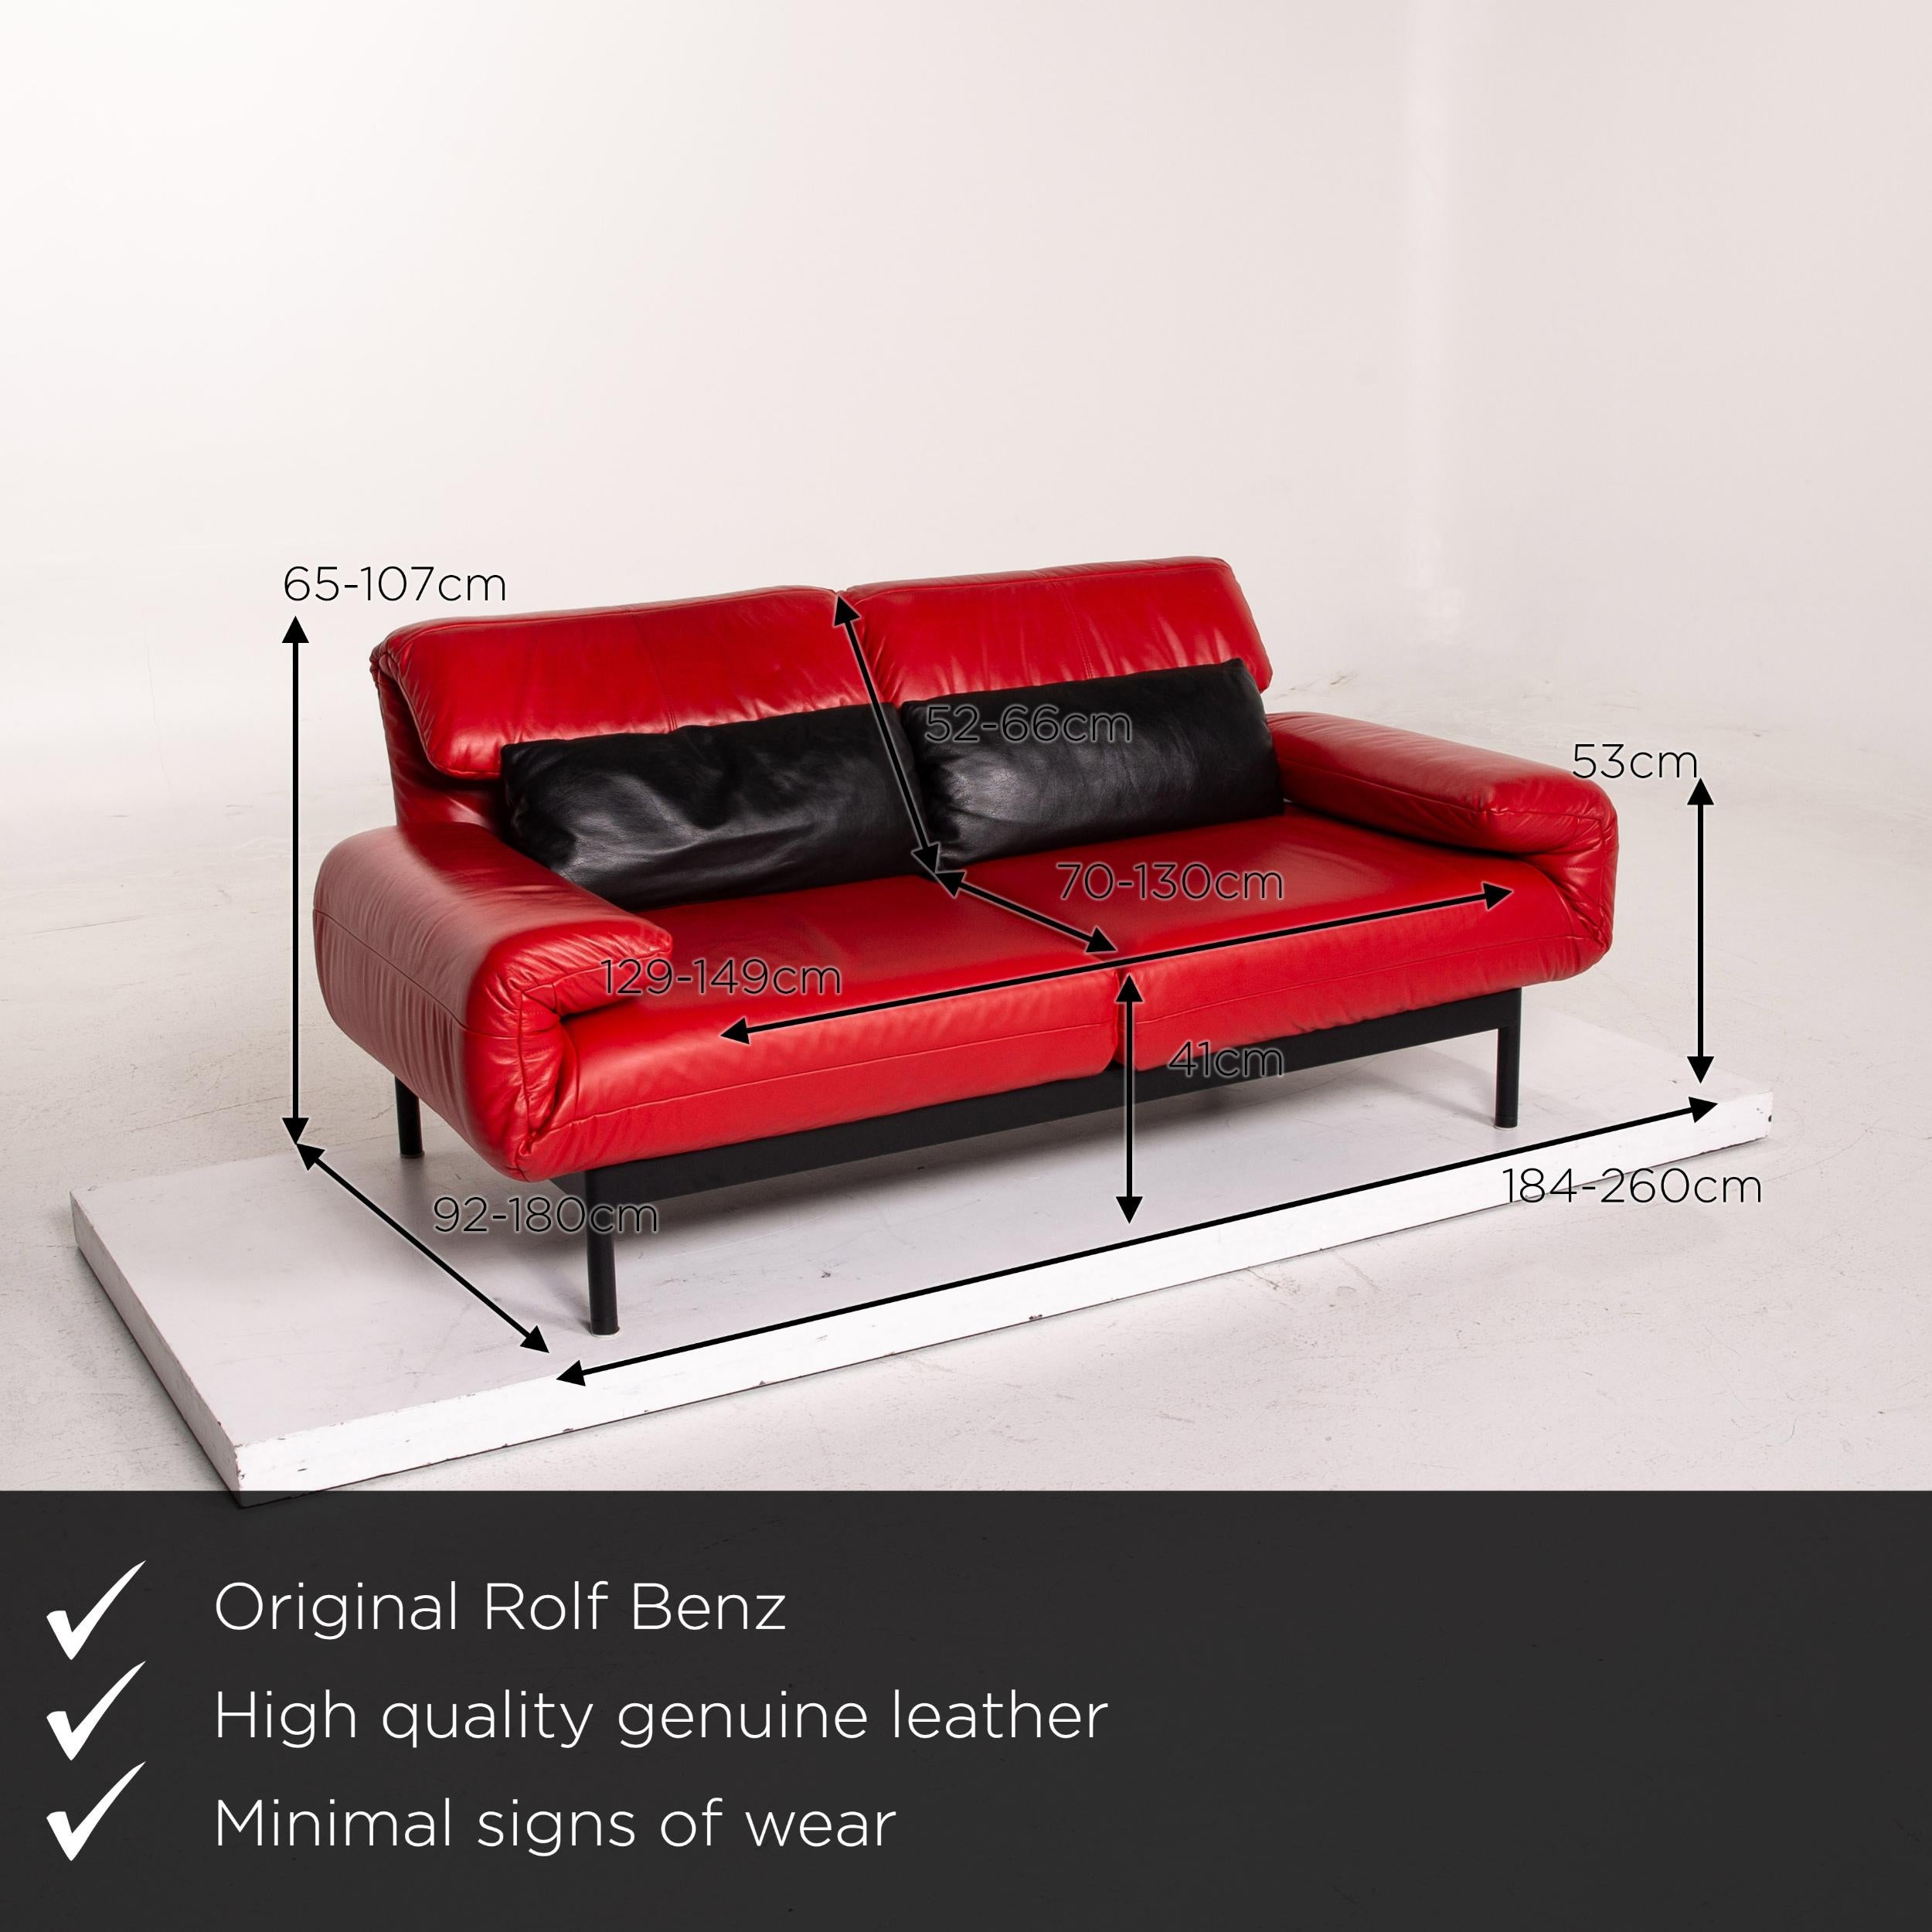 We present to you a Rolf Benz Plura leather sofa red black two-seat function relax function couch.
 

 Product measurements in centimeters:
 

Depth 92
Width 184
Height 65
Seat height 41
Rest height 53
Seat depth 70
Seat width 149
Back